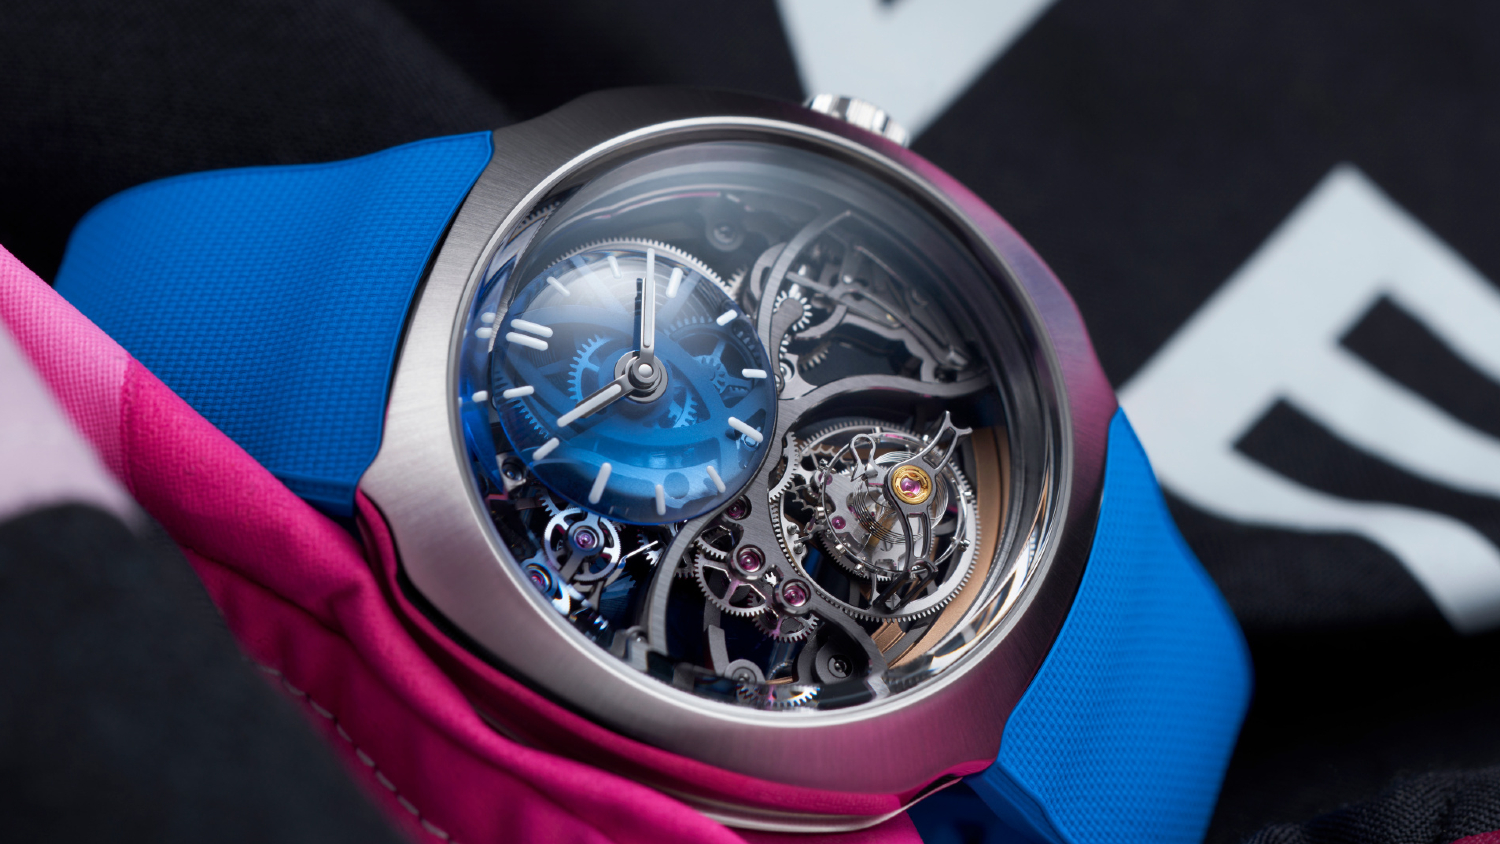 H. Moser & Cie adds Cylindrical Tourbillon Skeleton Alpine Limited Edition